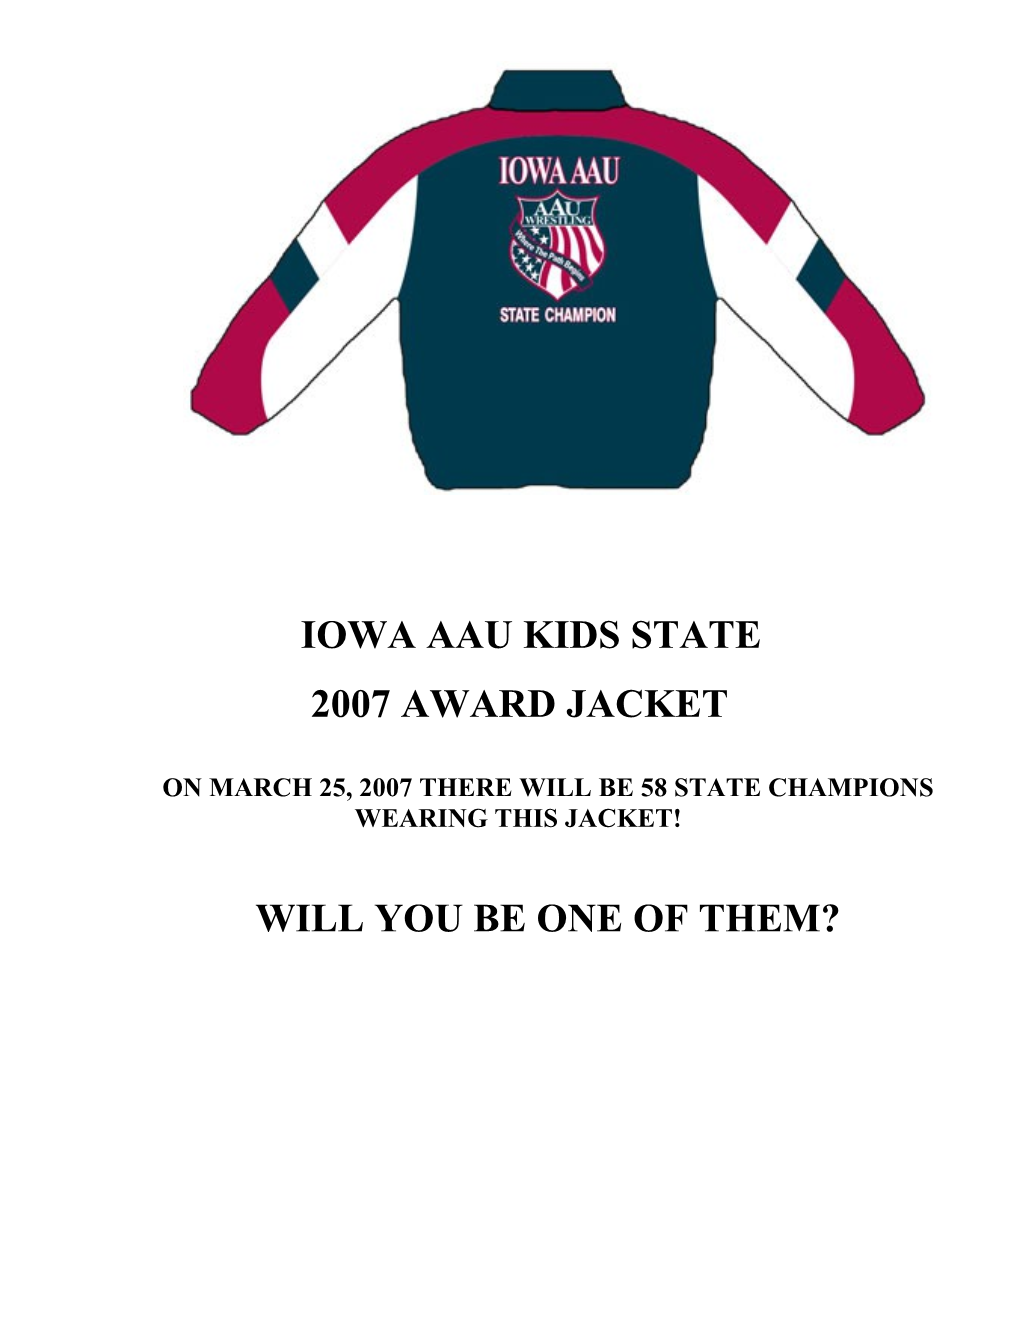 A New Tradition Begins, Iowa Kids State Moves To